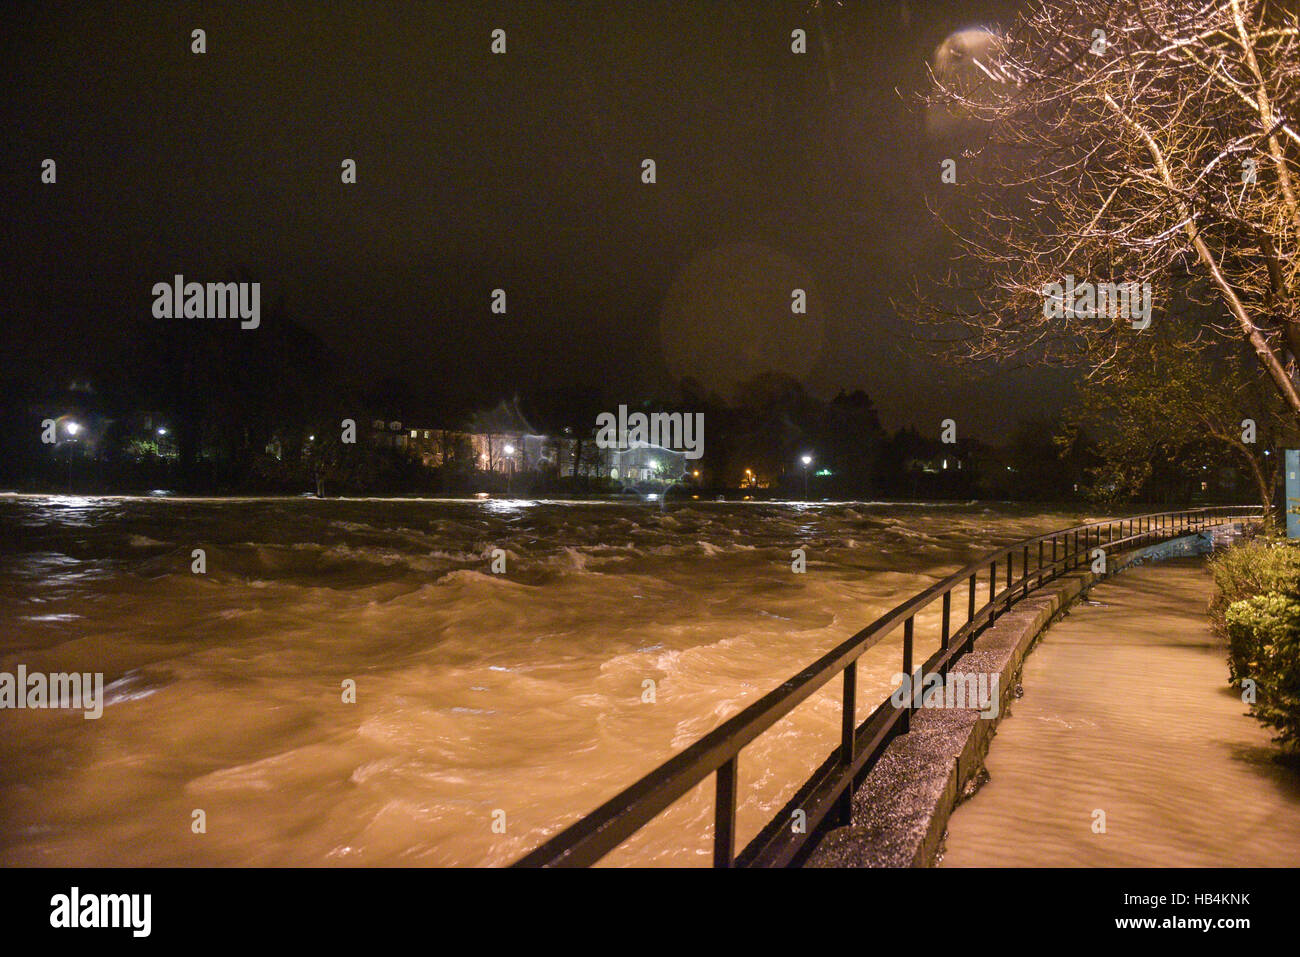 The River Kent burst its banks on the evening of the 5th of December in Kendal, Cumbria. Picture taken on in the 6th of December 2015 after 36 hours of torrential rain. Stock Photo